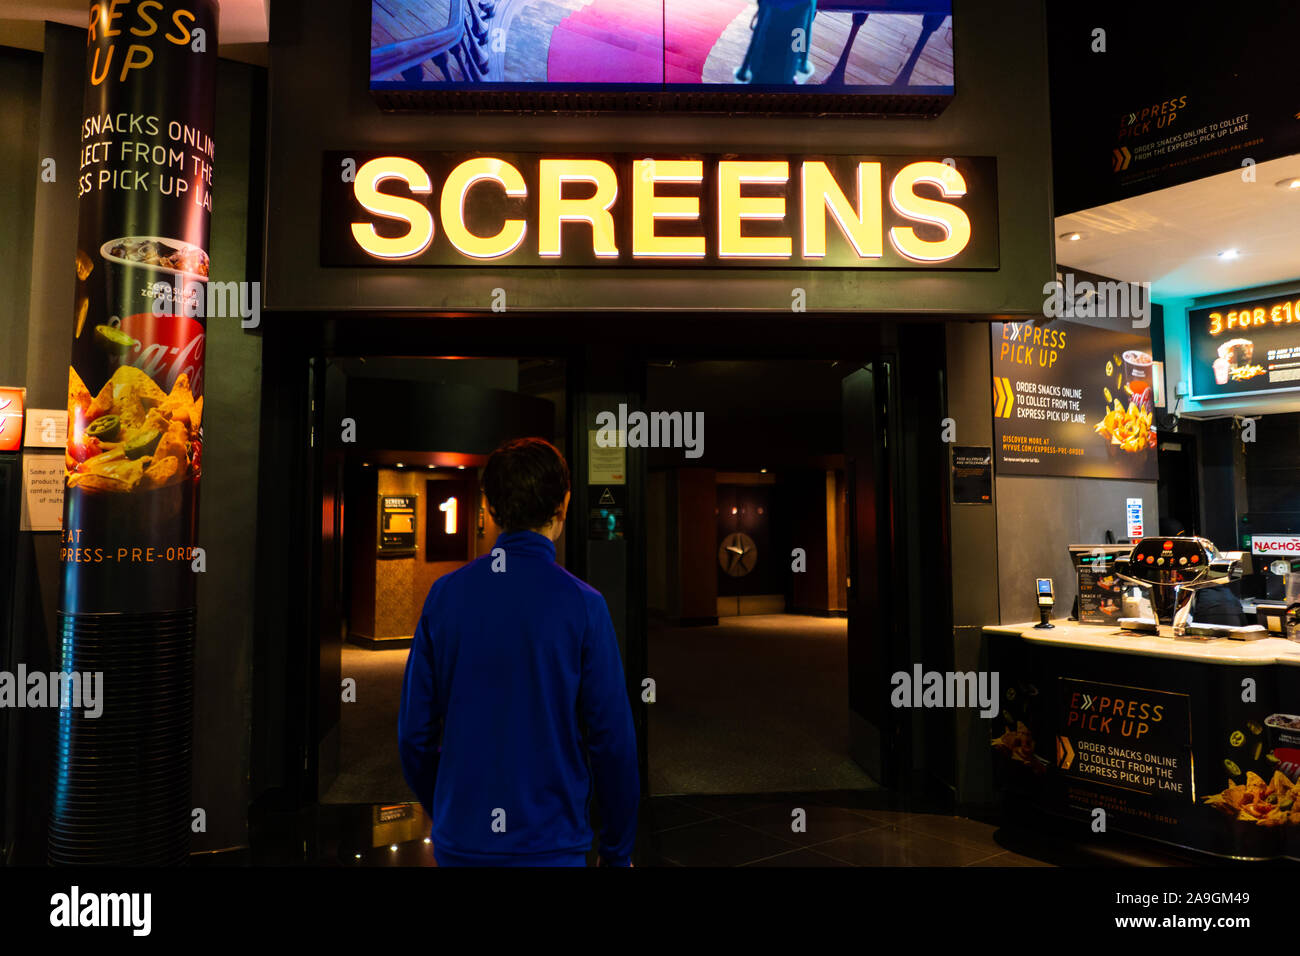 A young boy with ADHD, autism, Asperger syndrome walks towards the cinema screens at VUE in Newcastle to watch a movie, film Stock Photo